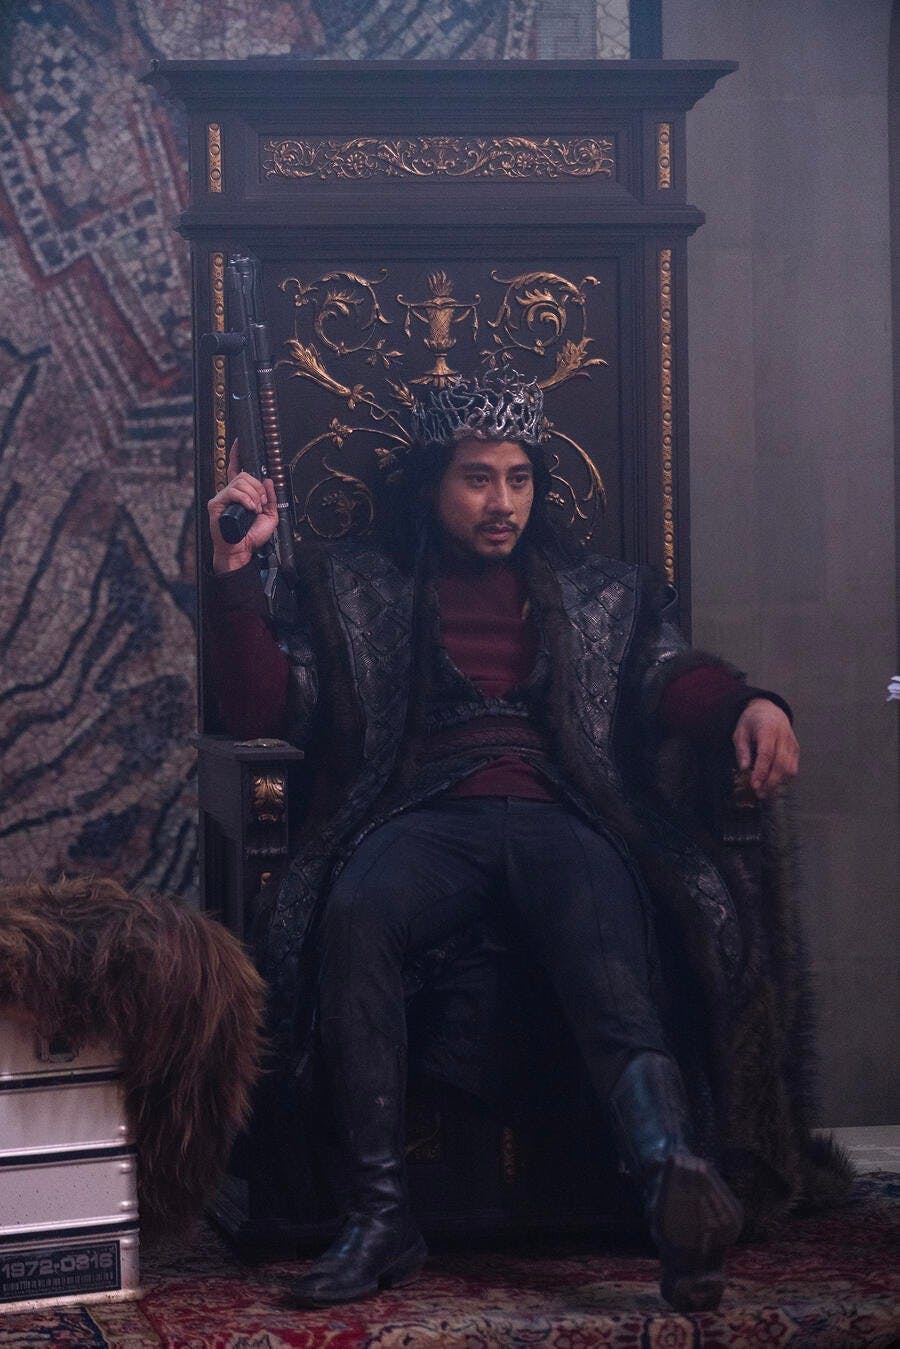 The High Lord of Kalar and Pike's former Yeoman, Zacarias, wearing a stylized crown, sits on the palace throne in 'Among the Lotus Eaters'